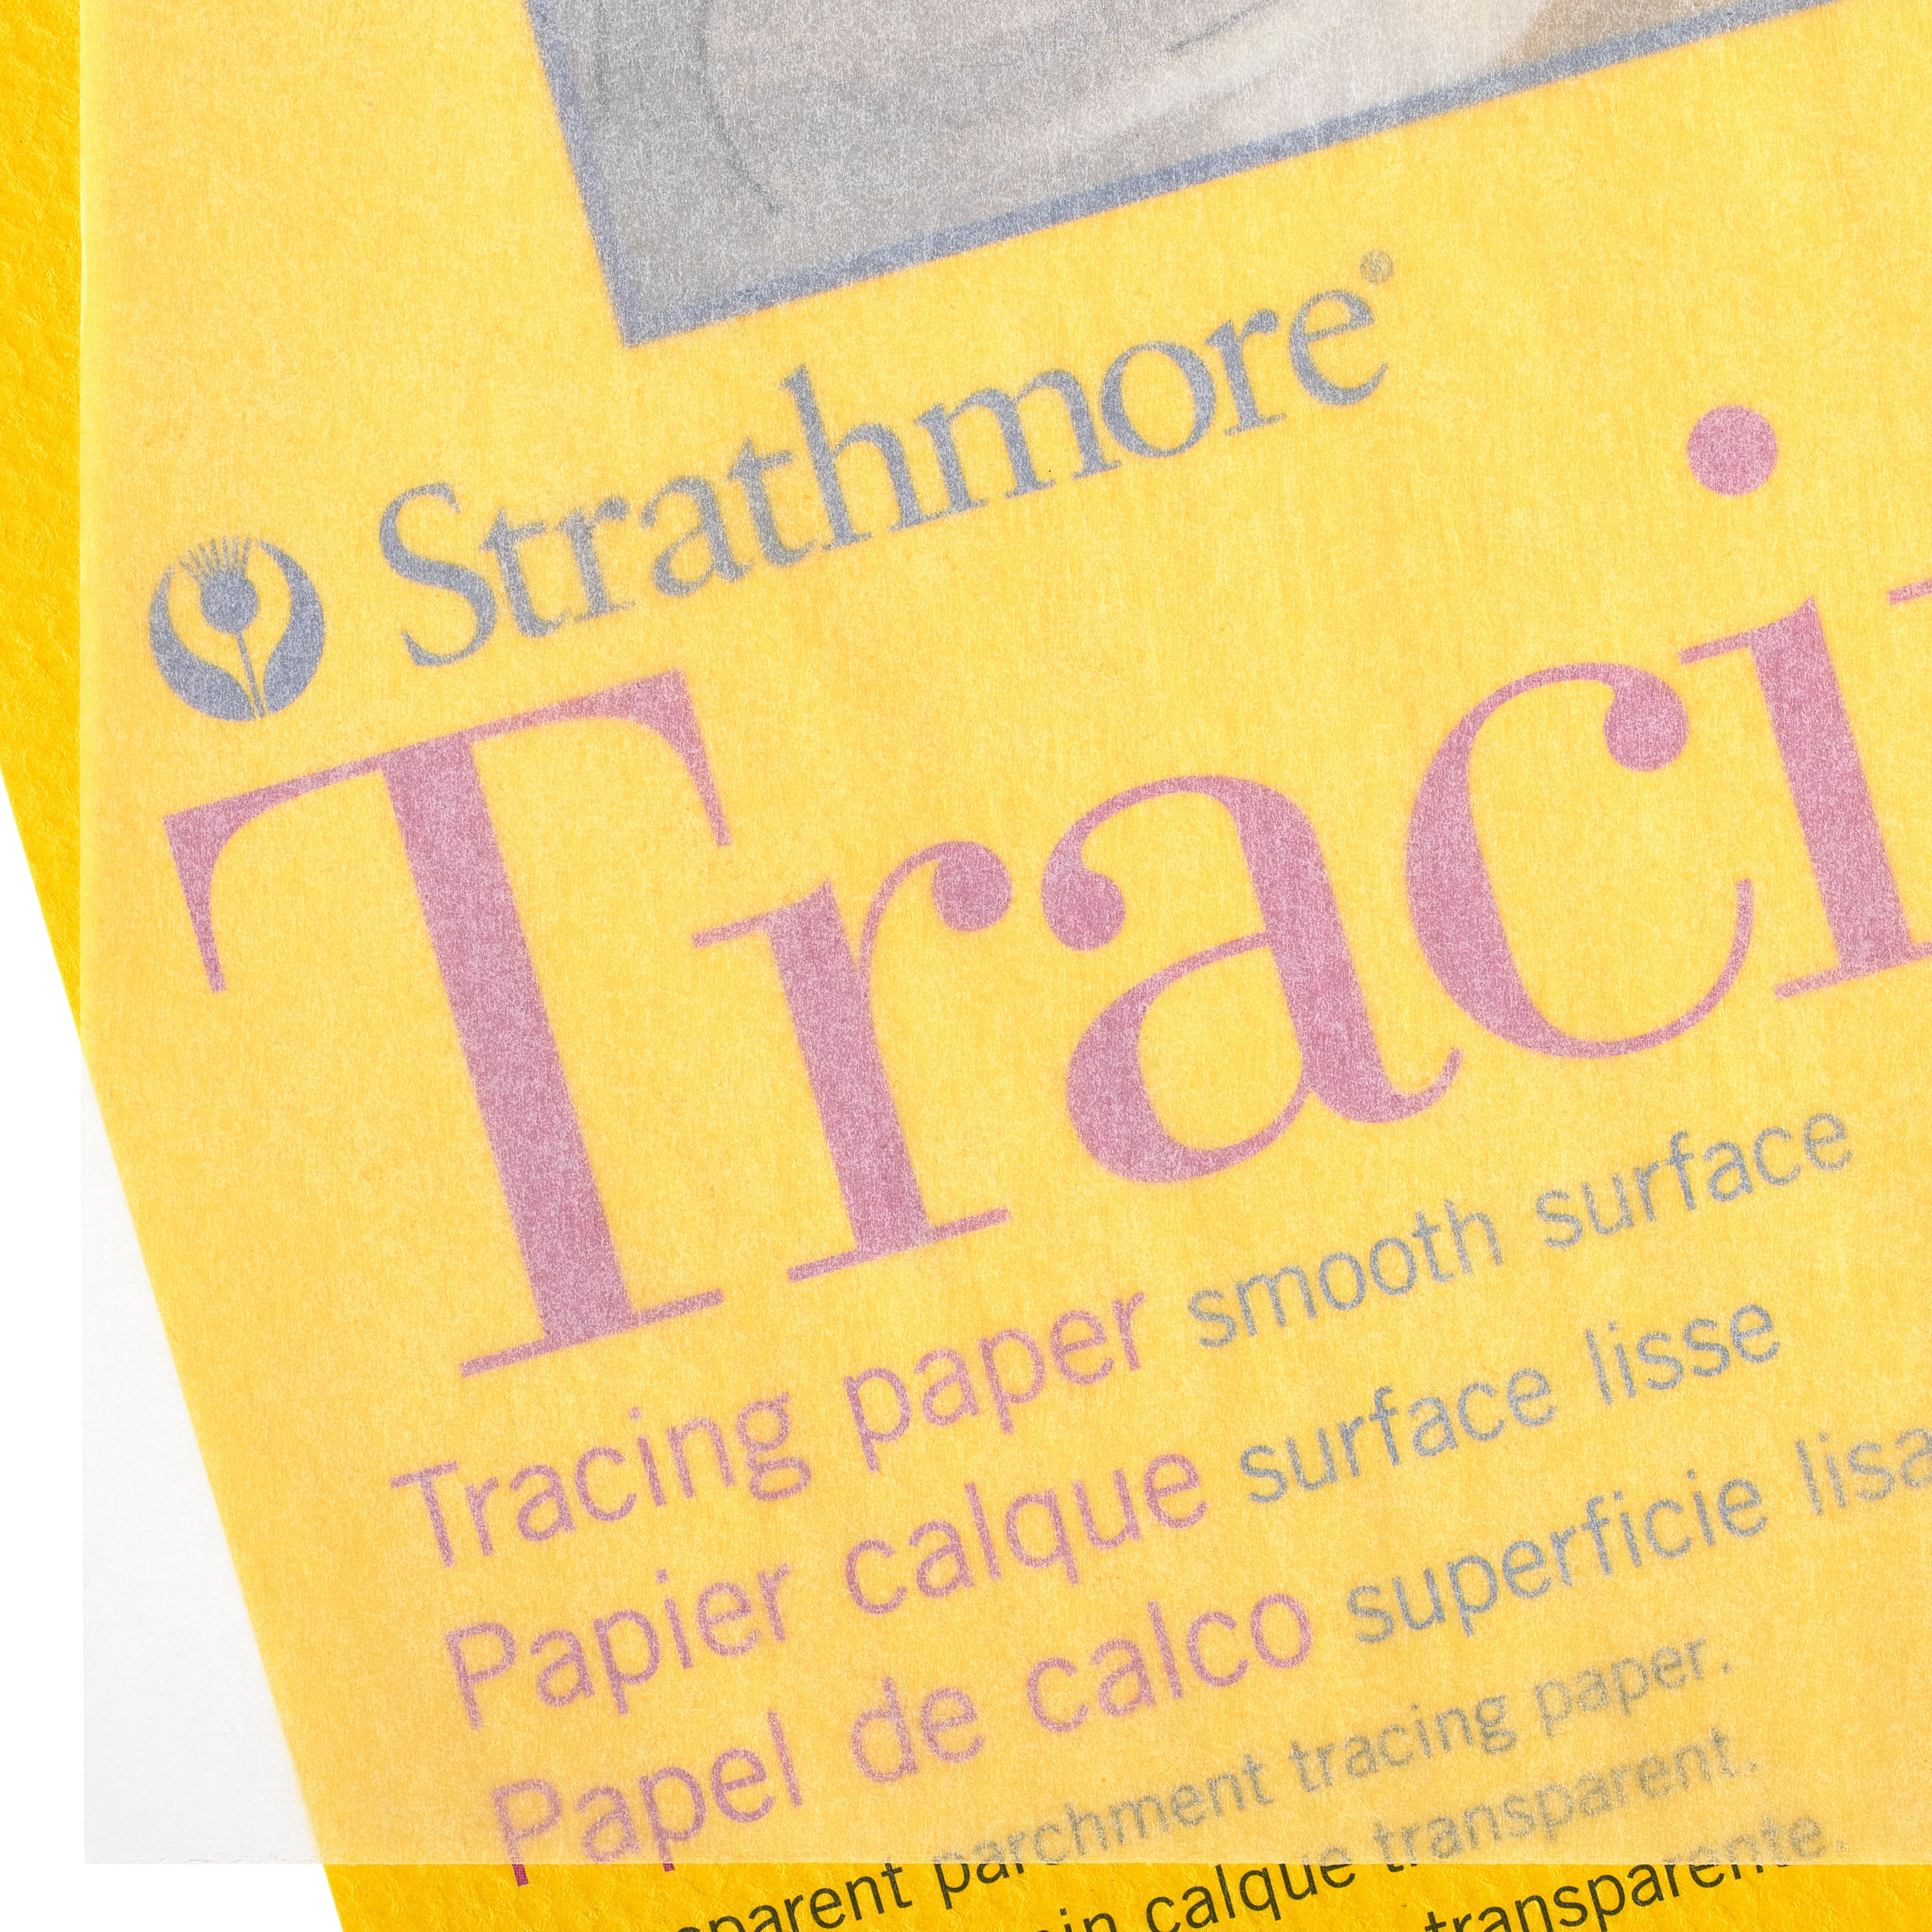 Strathmore Tracing Paper Pad, 300 Series, Tape-Bound, 50 Sheets, 9 x